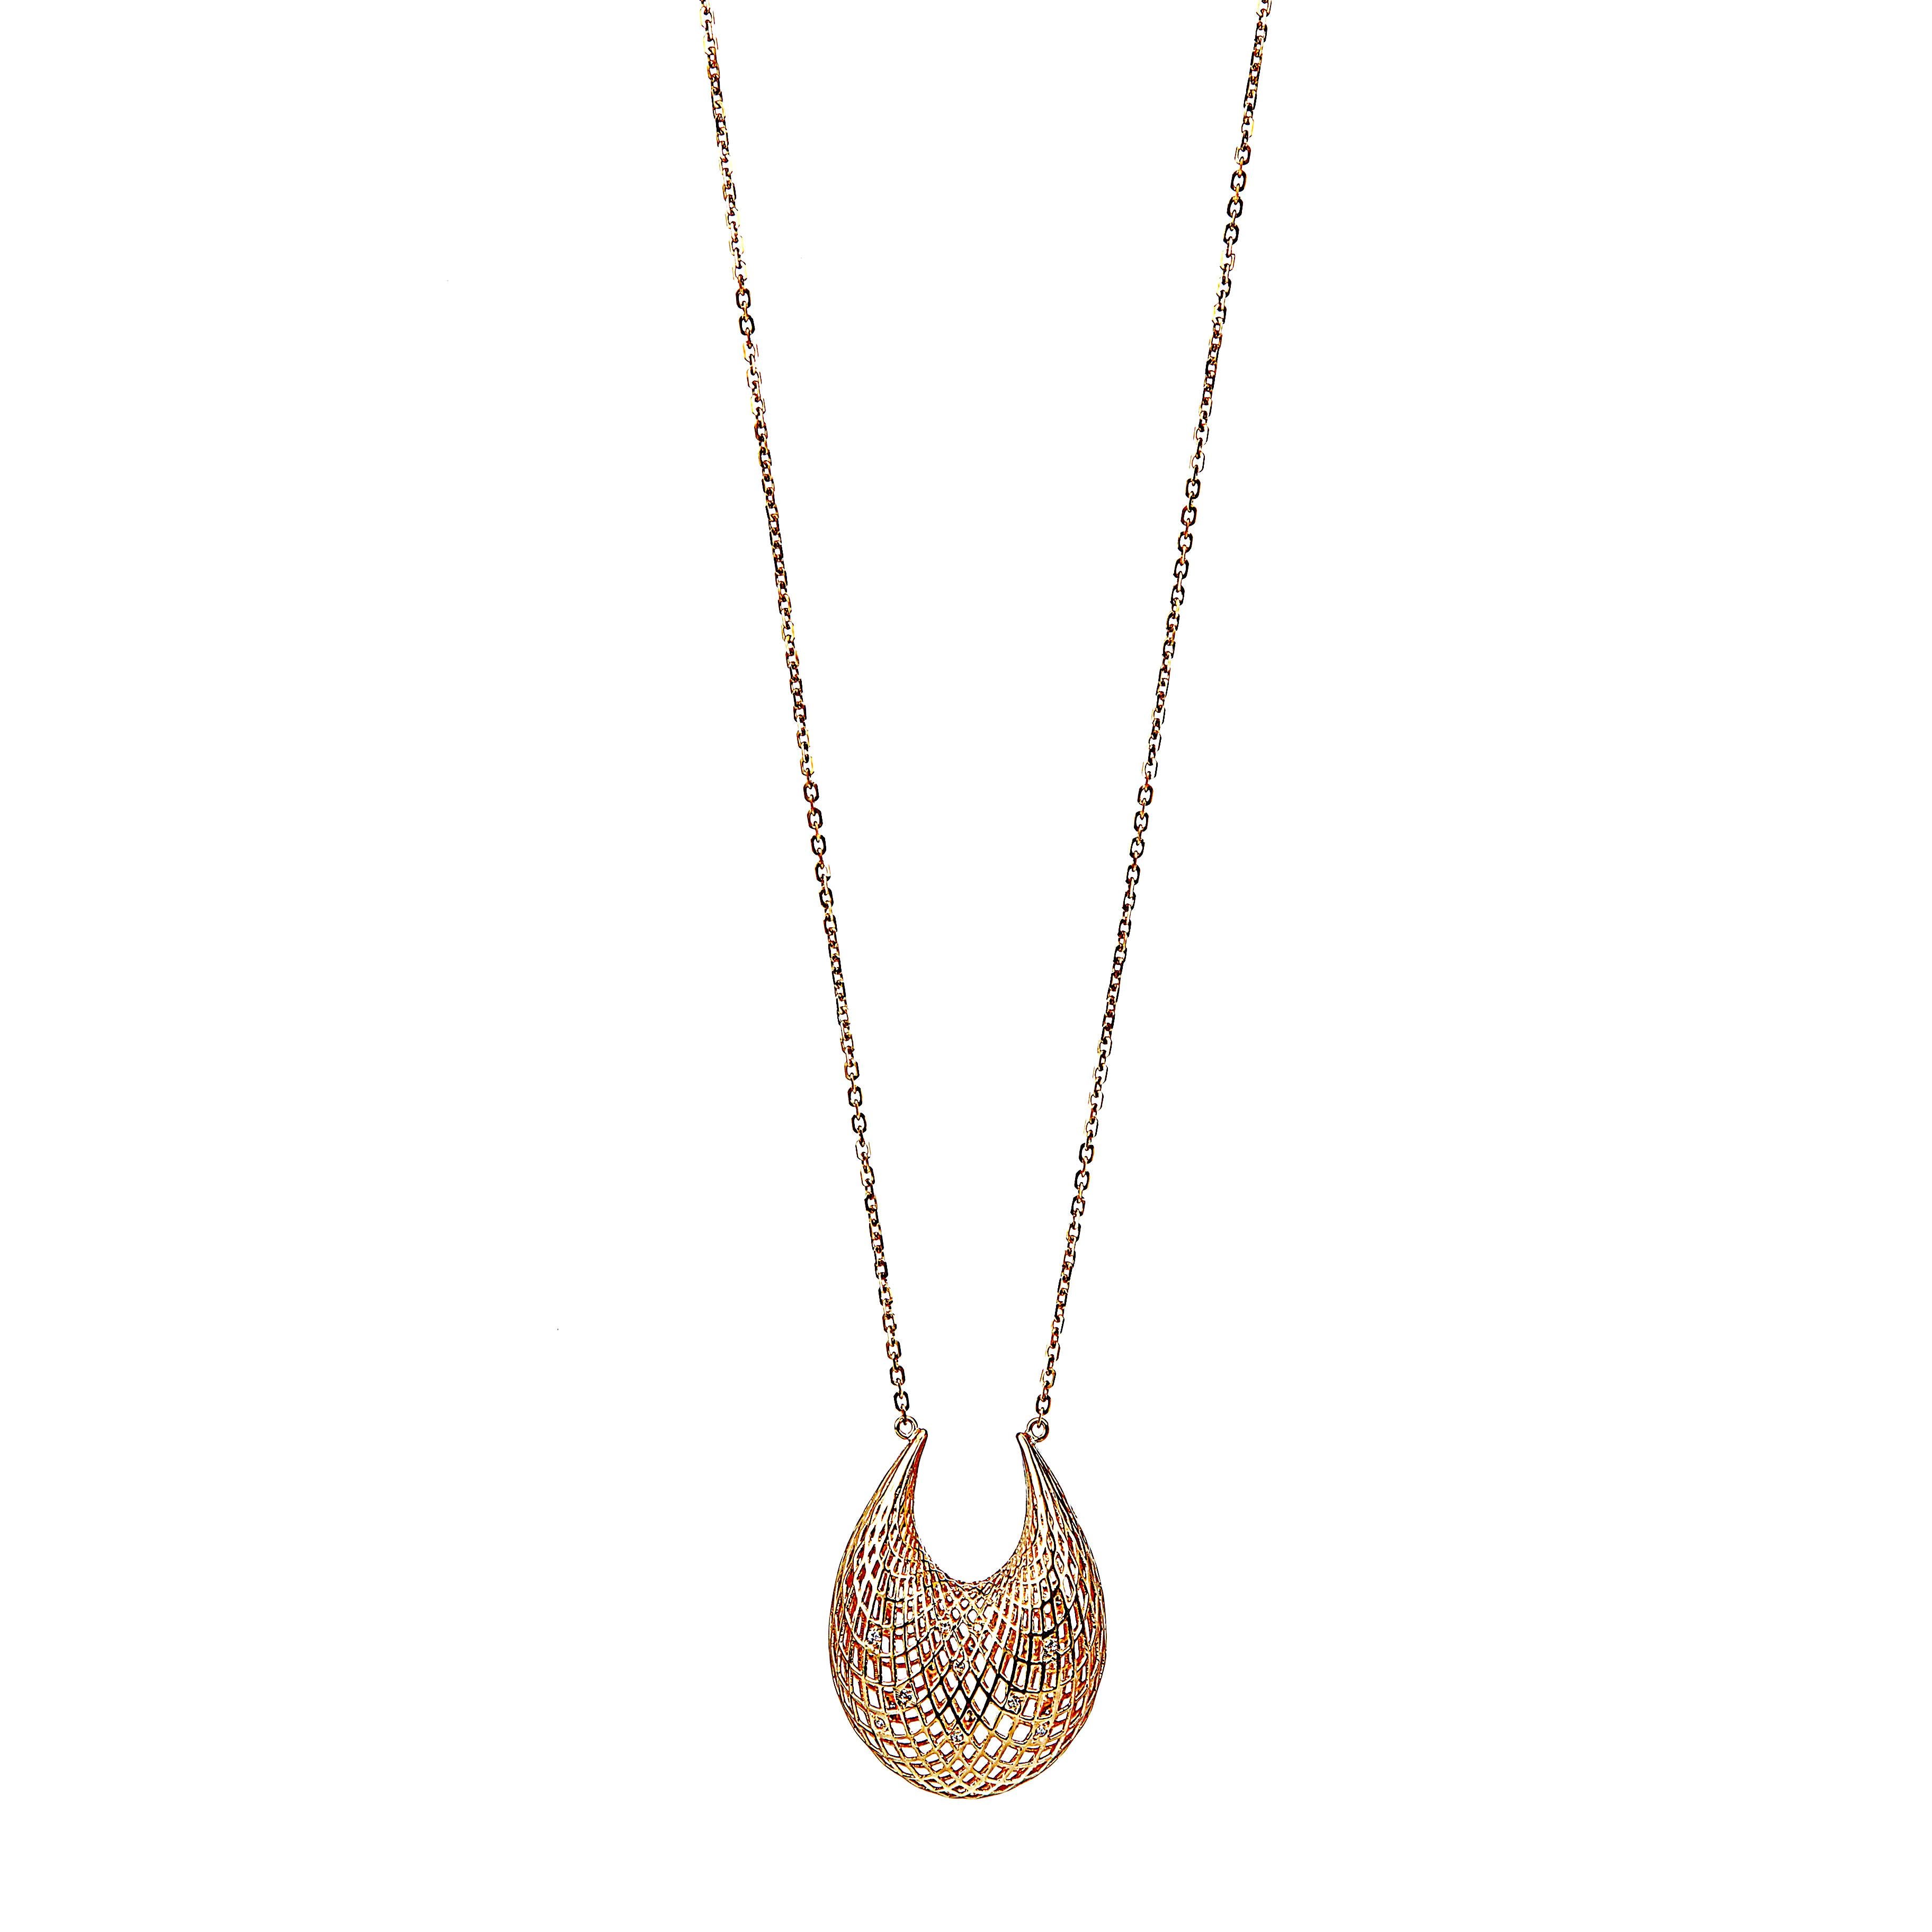 Contemporary Yemyungji Diamond 18K Yellow Gold Blooming Long Chain Necklace For Sale